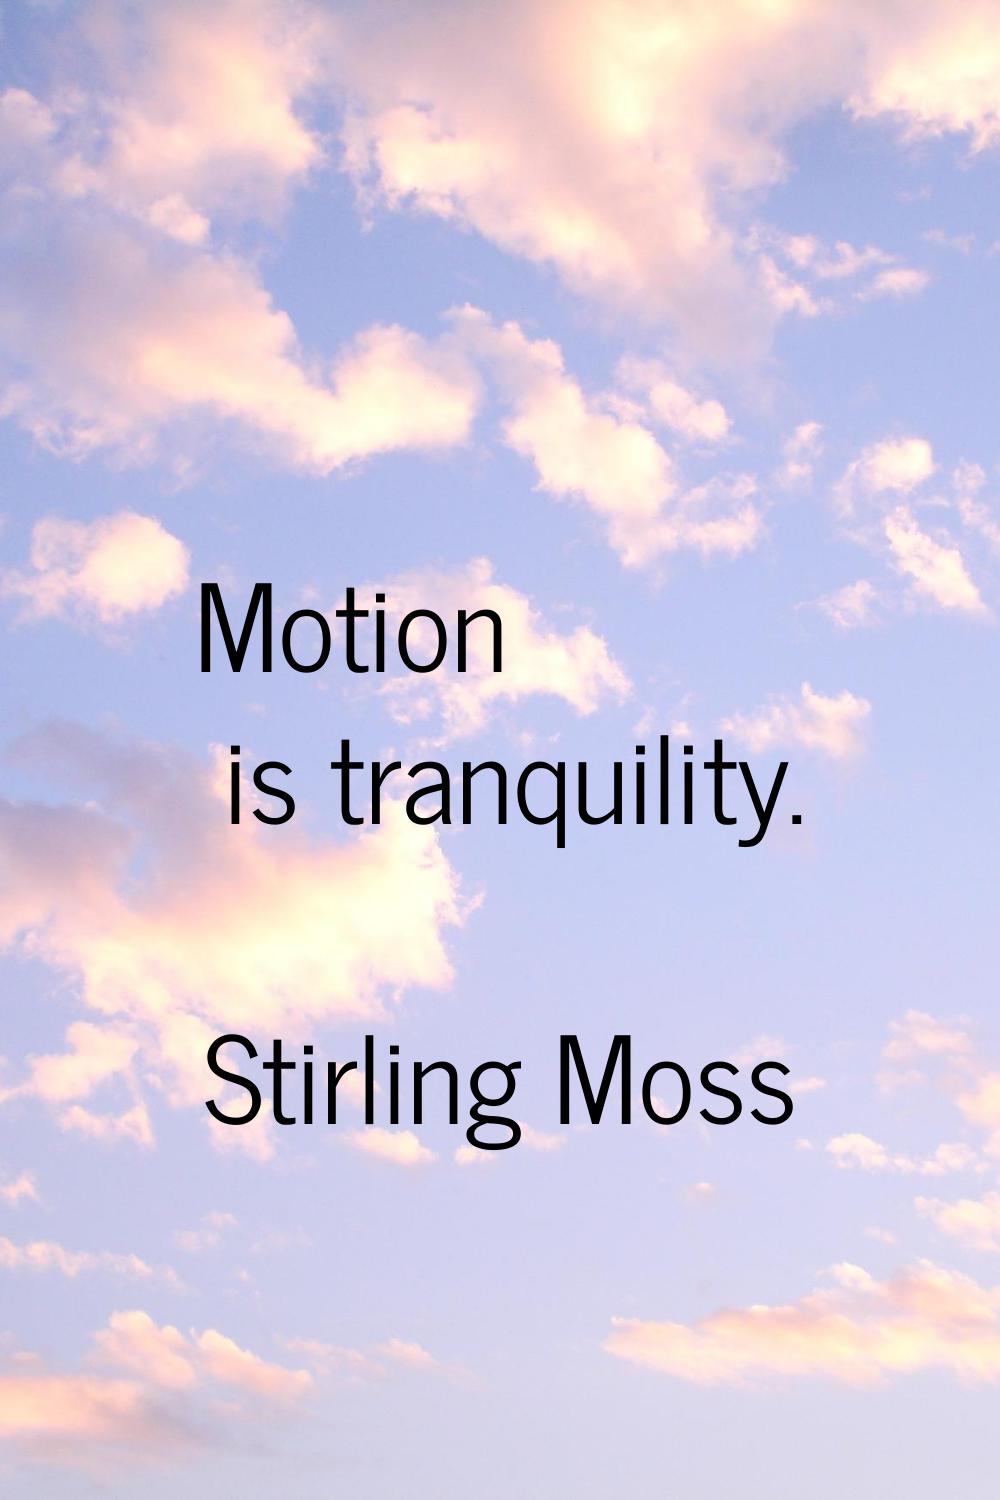 Motion is tranquility.